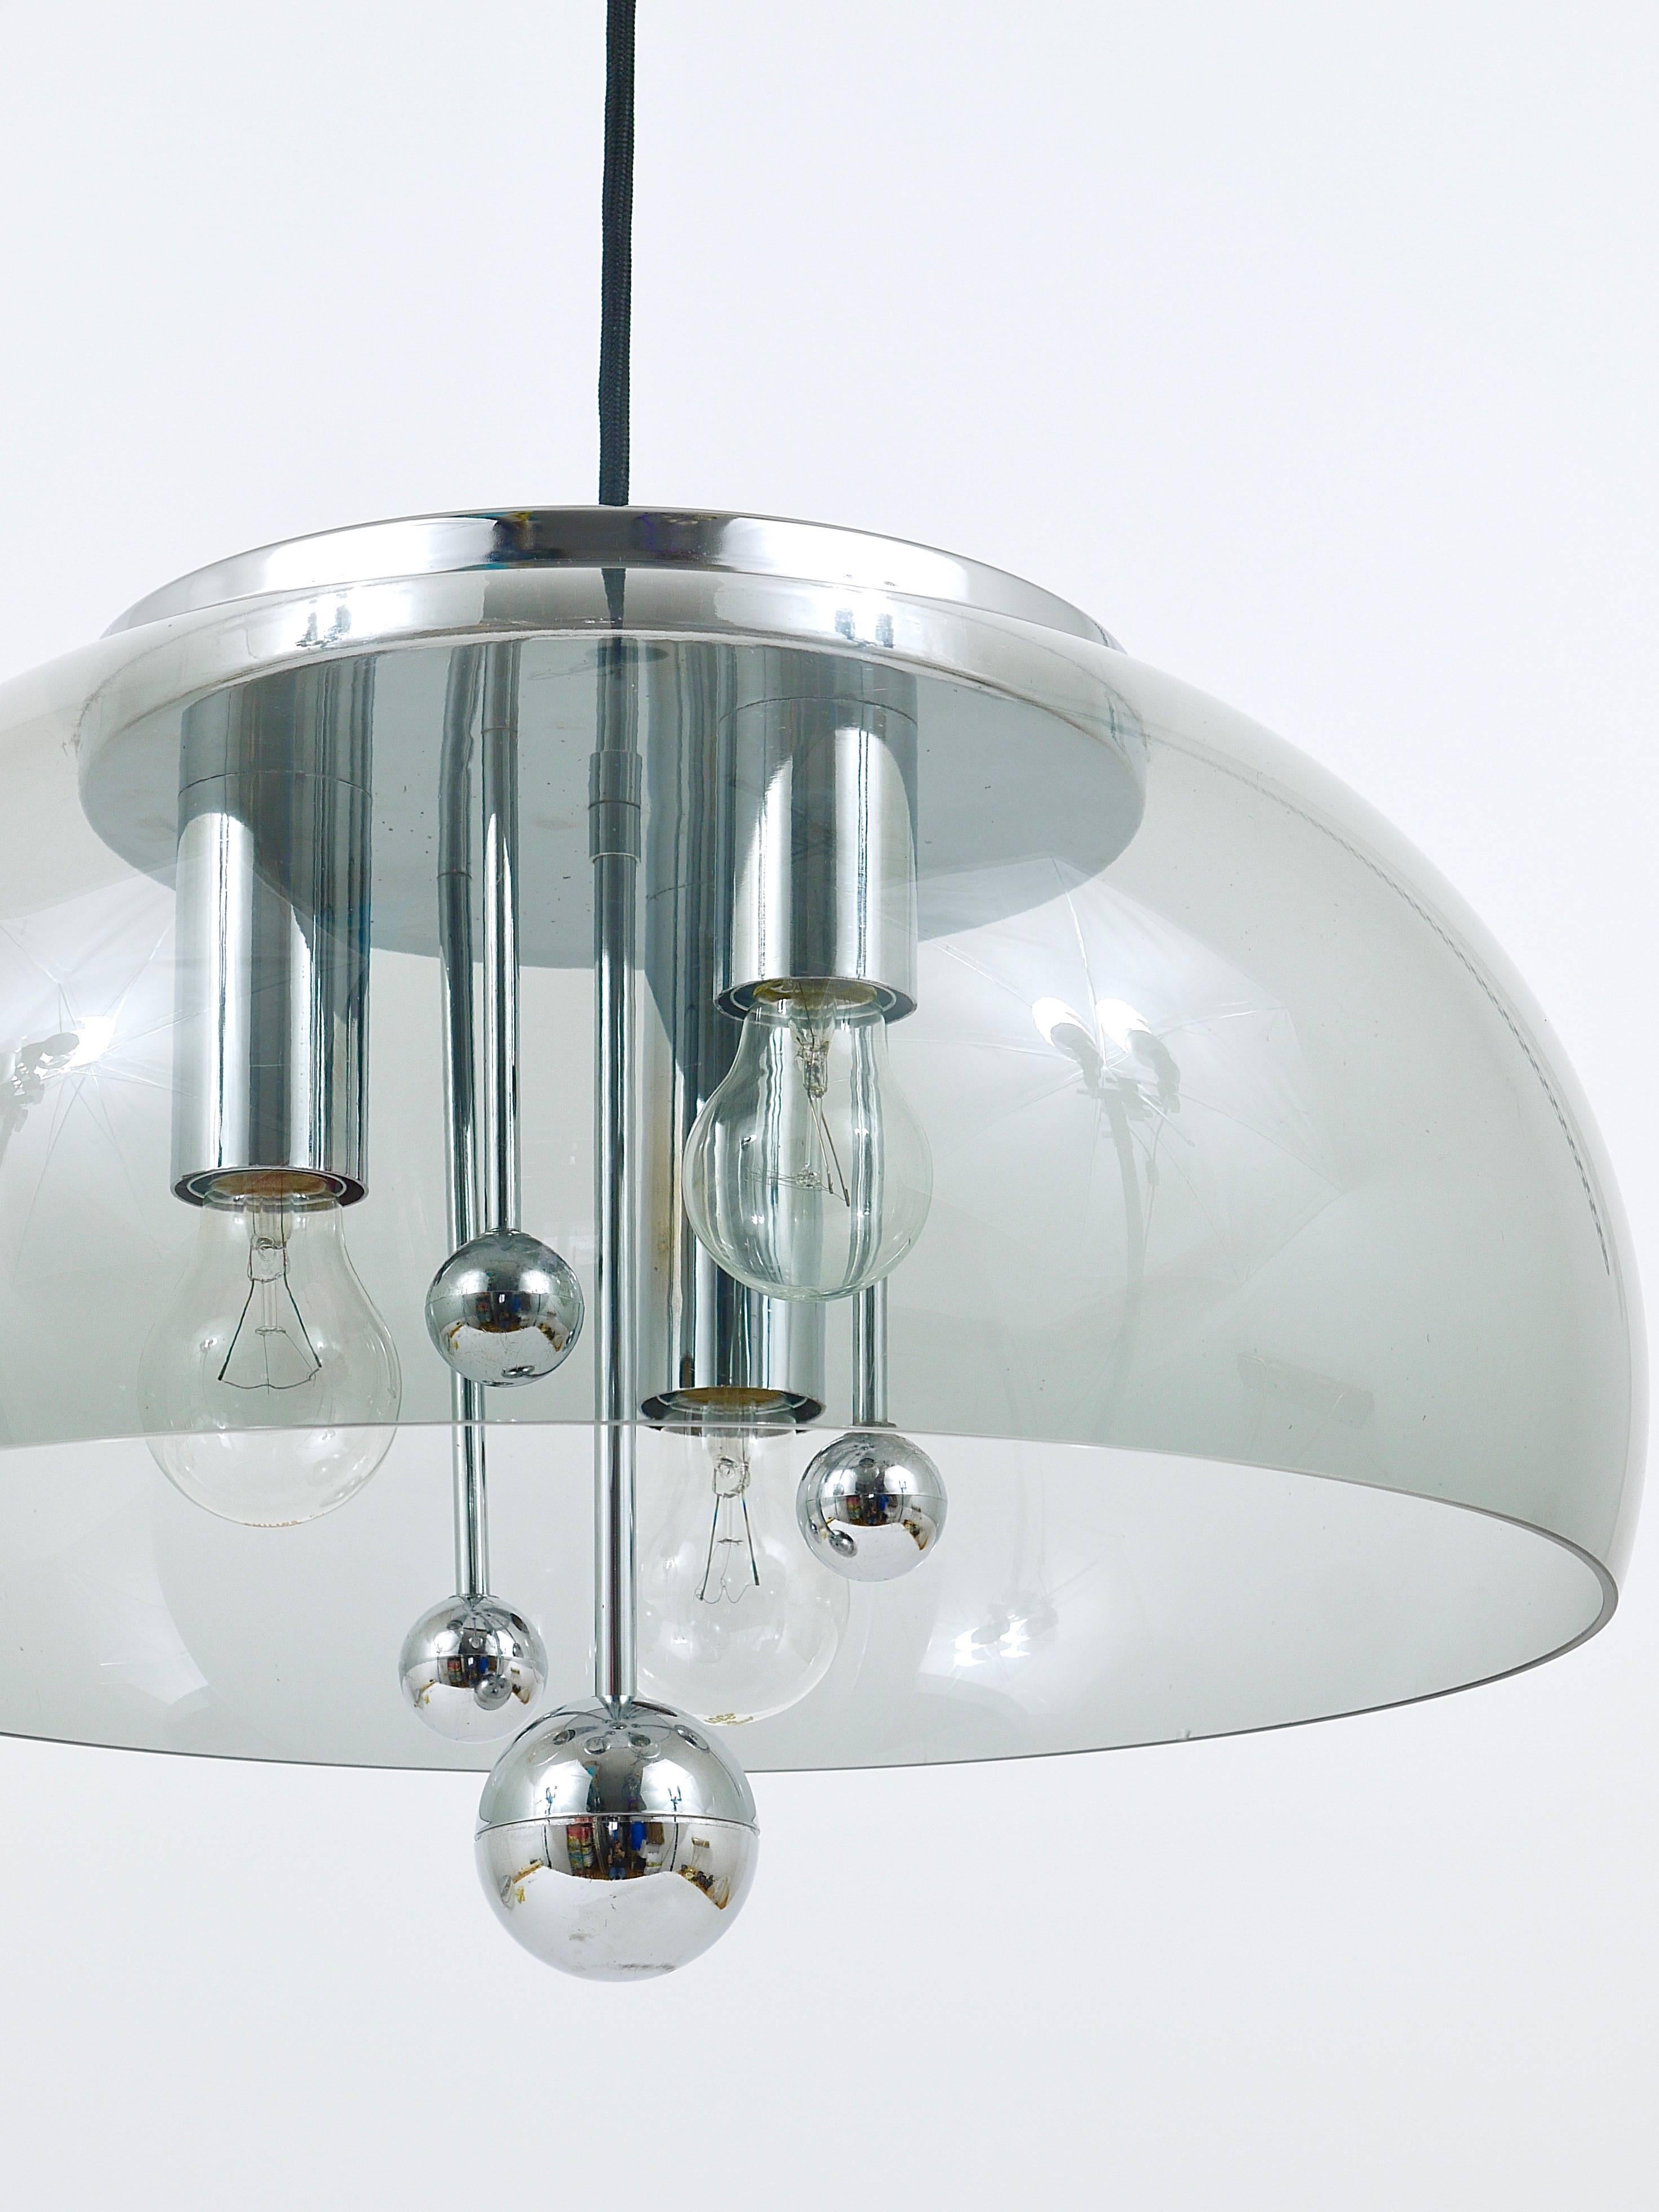 Midcentury Space Age Globe Pendant Lamp with Chromed Spheres, Germany, 1970s For Sale 7